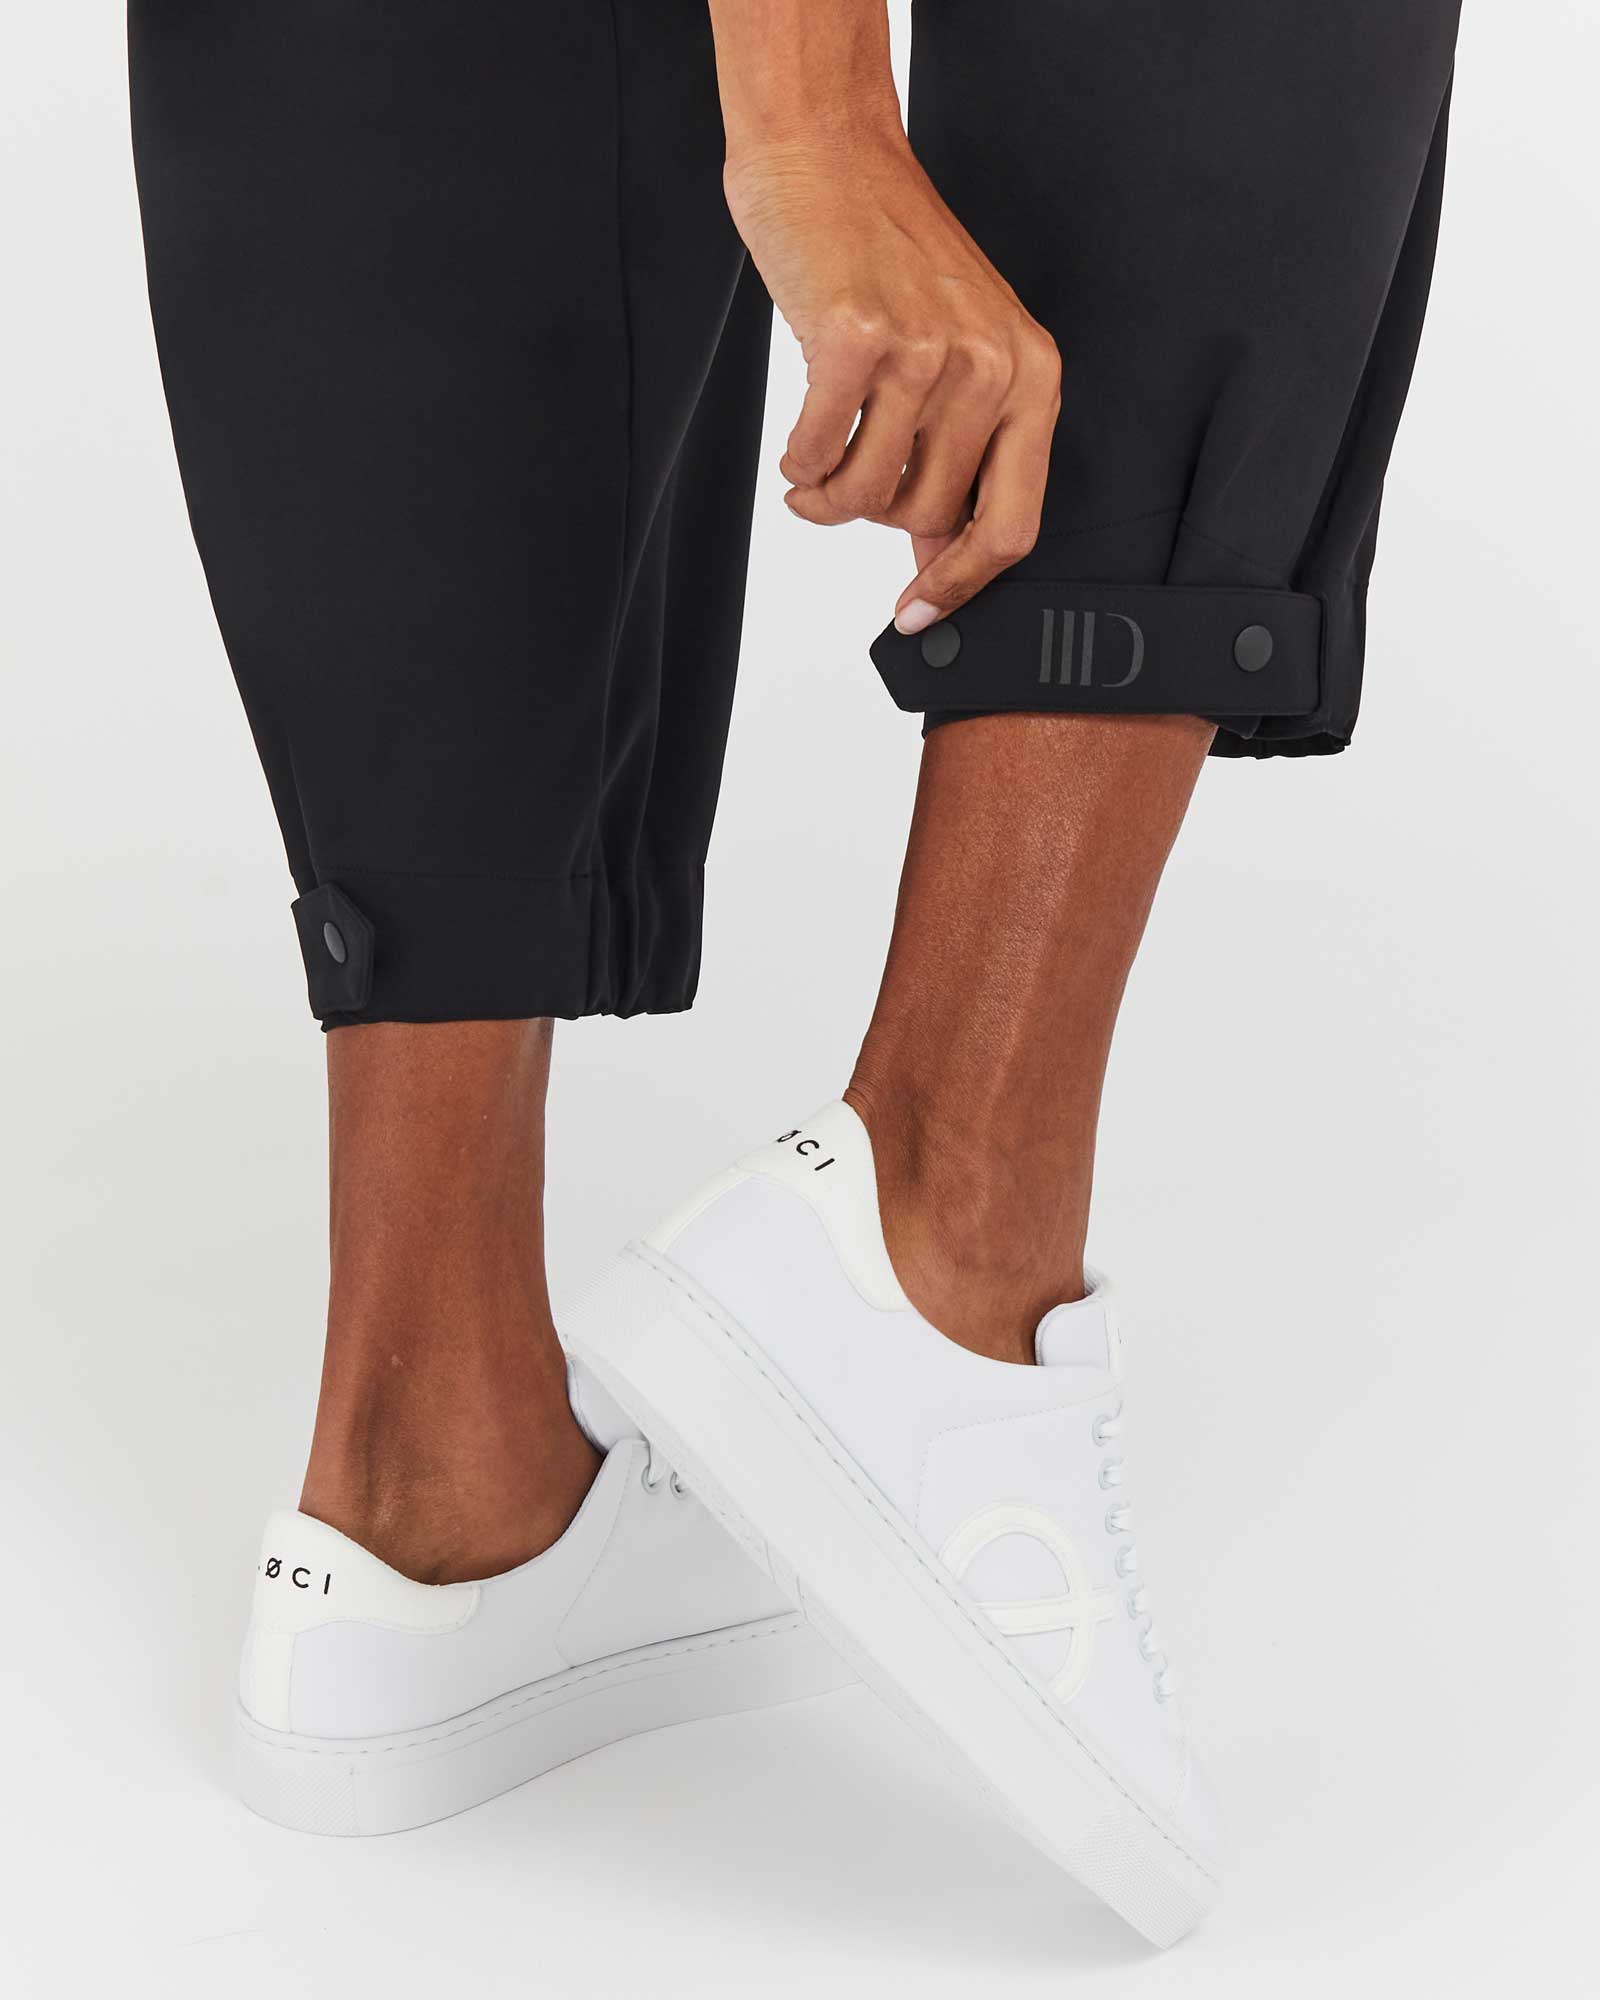 Two-Way Commuter Pant Black